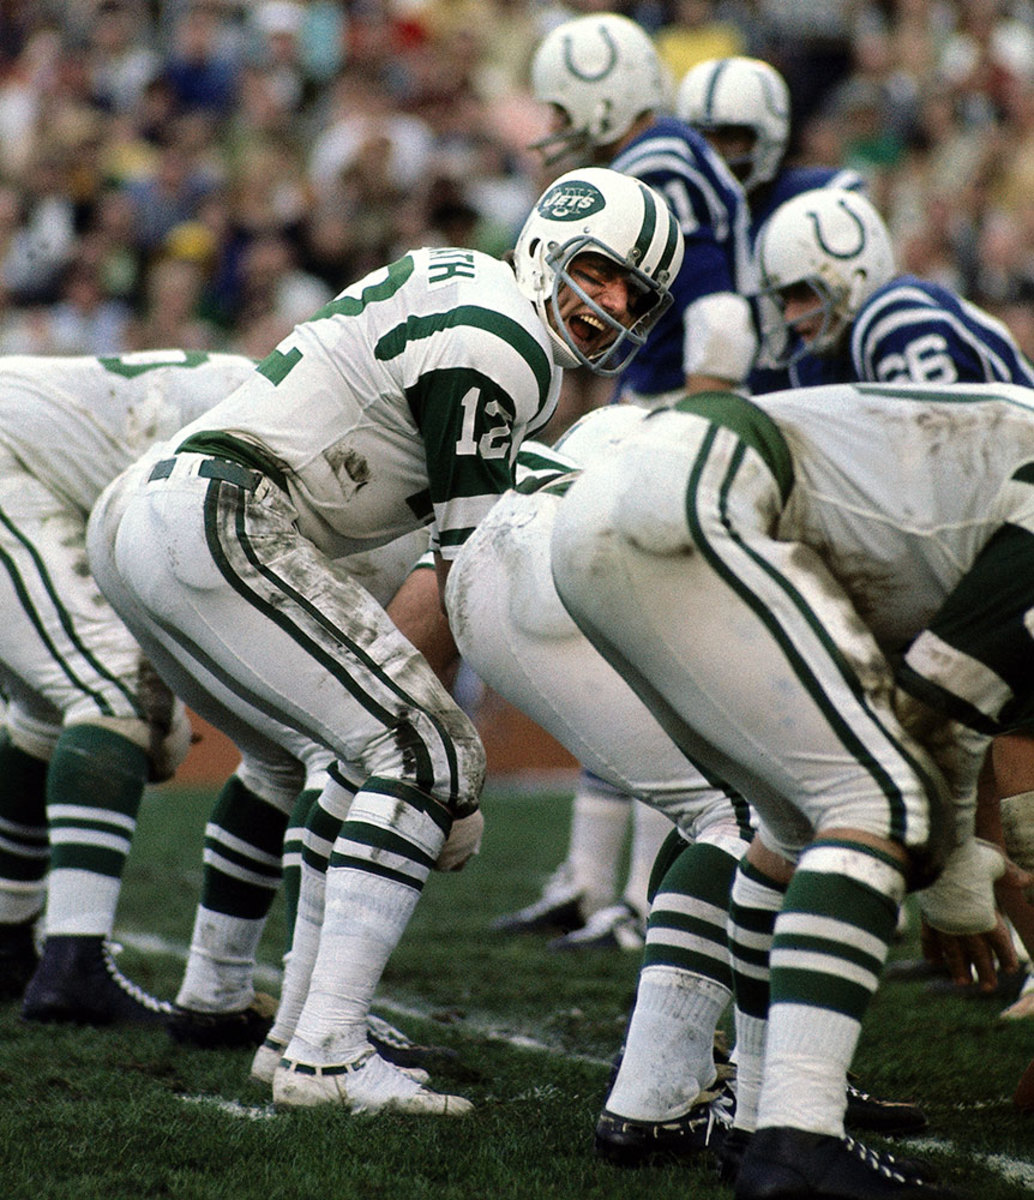 Namath delivered on his Super Bowl III guarantee and thus legitimized the AFL.